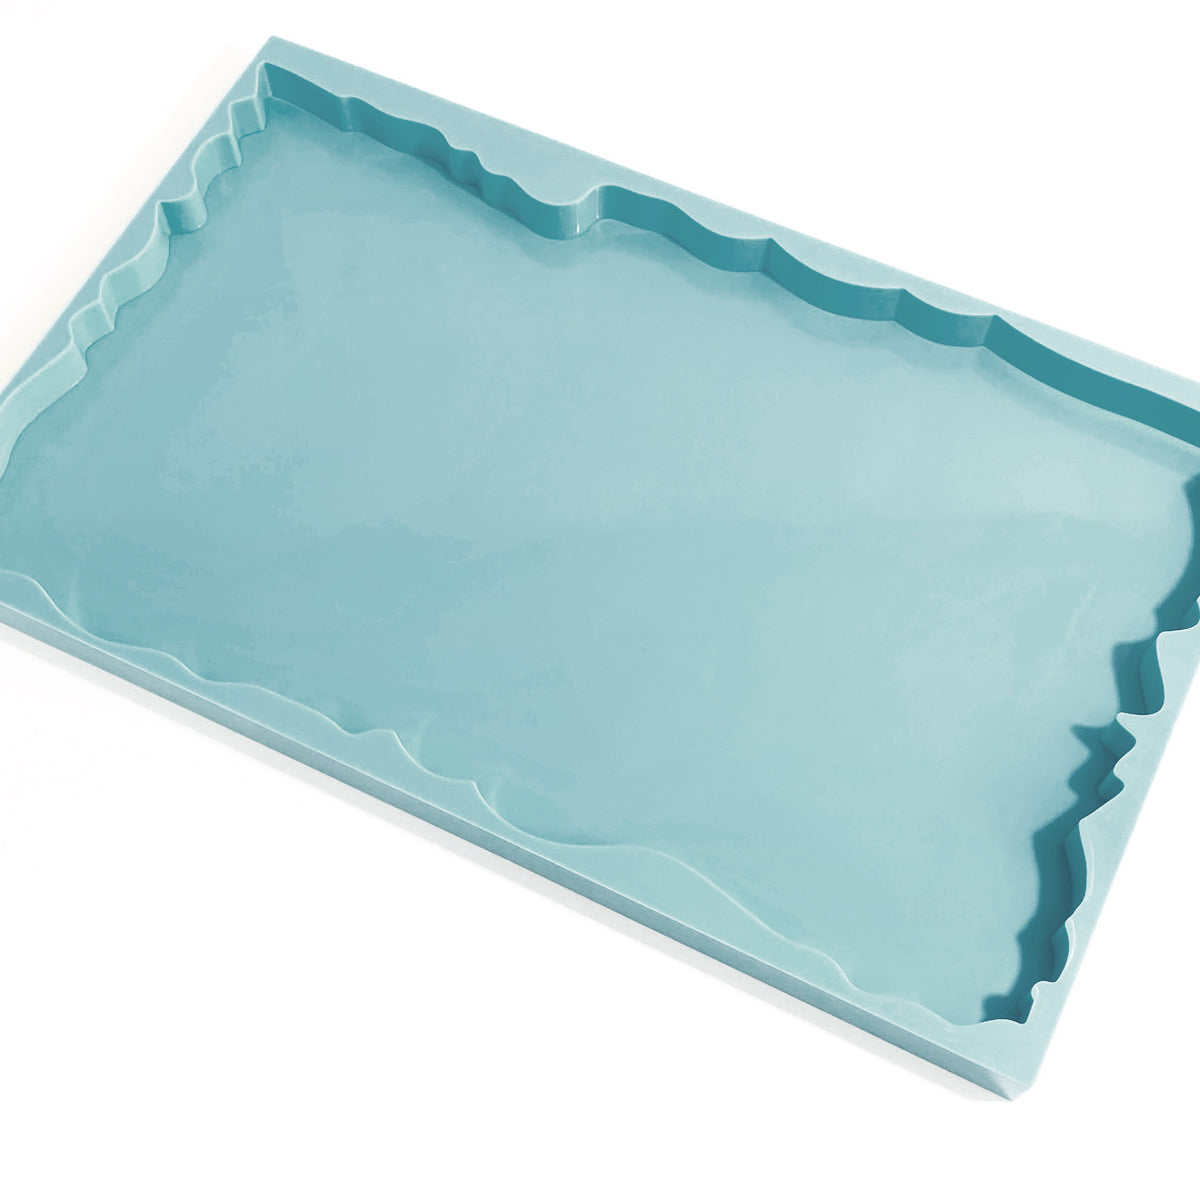 Rectangle Silicone Geode Tray Mold - XL